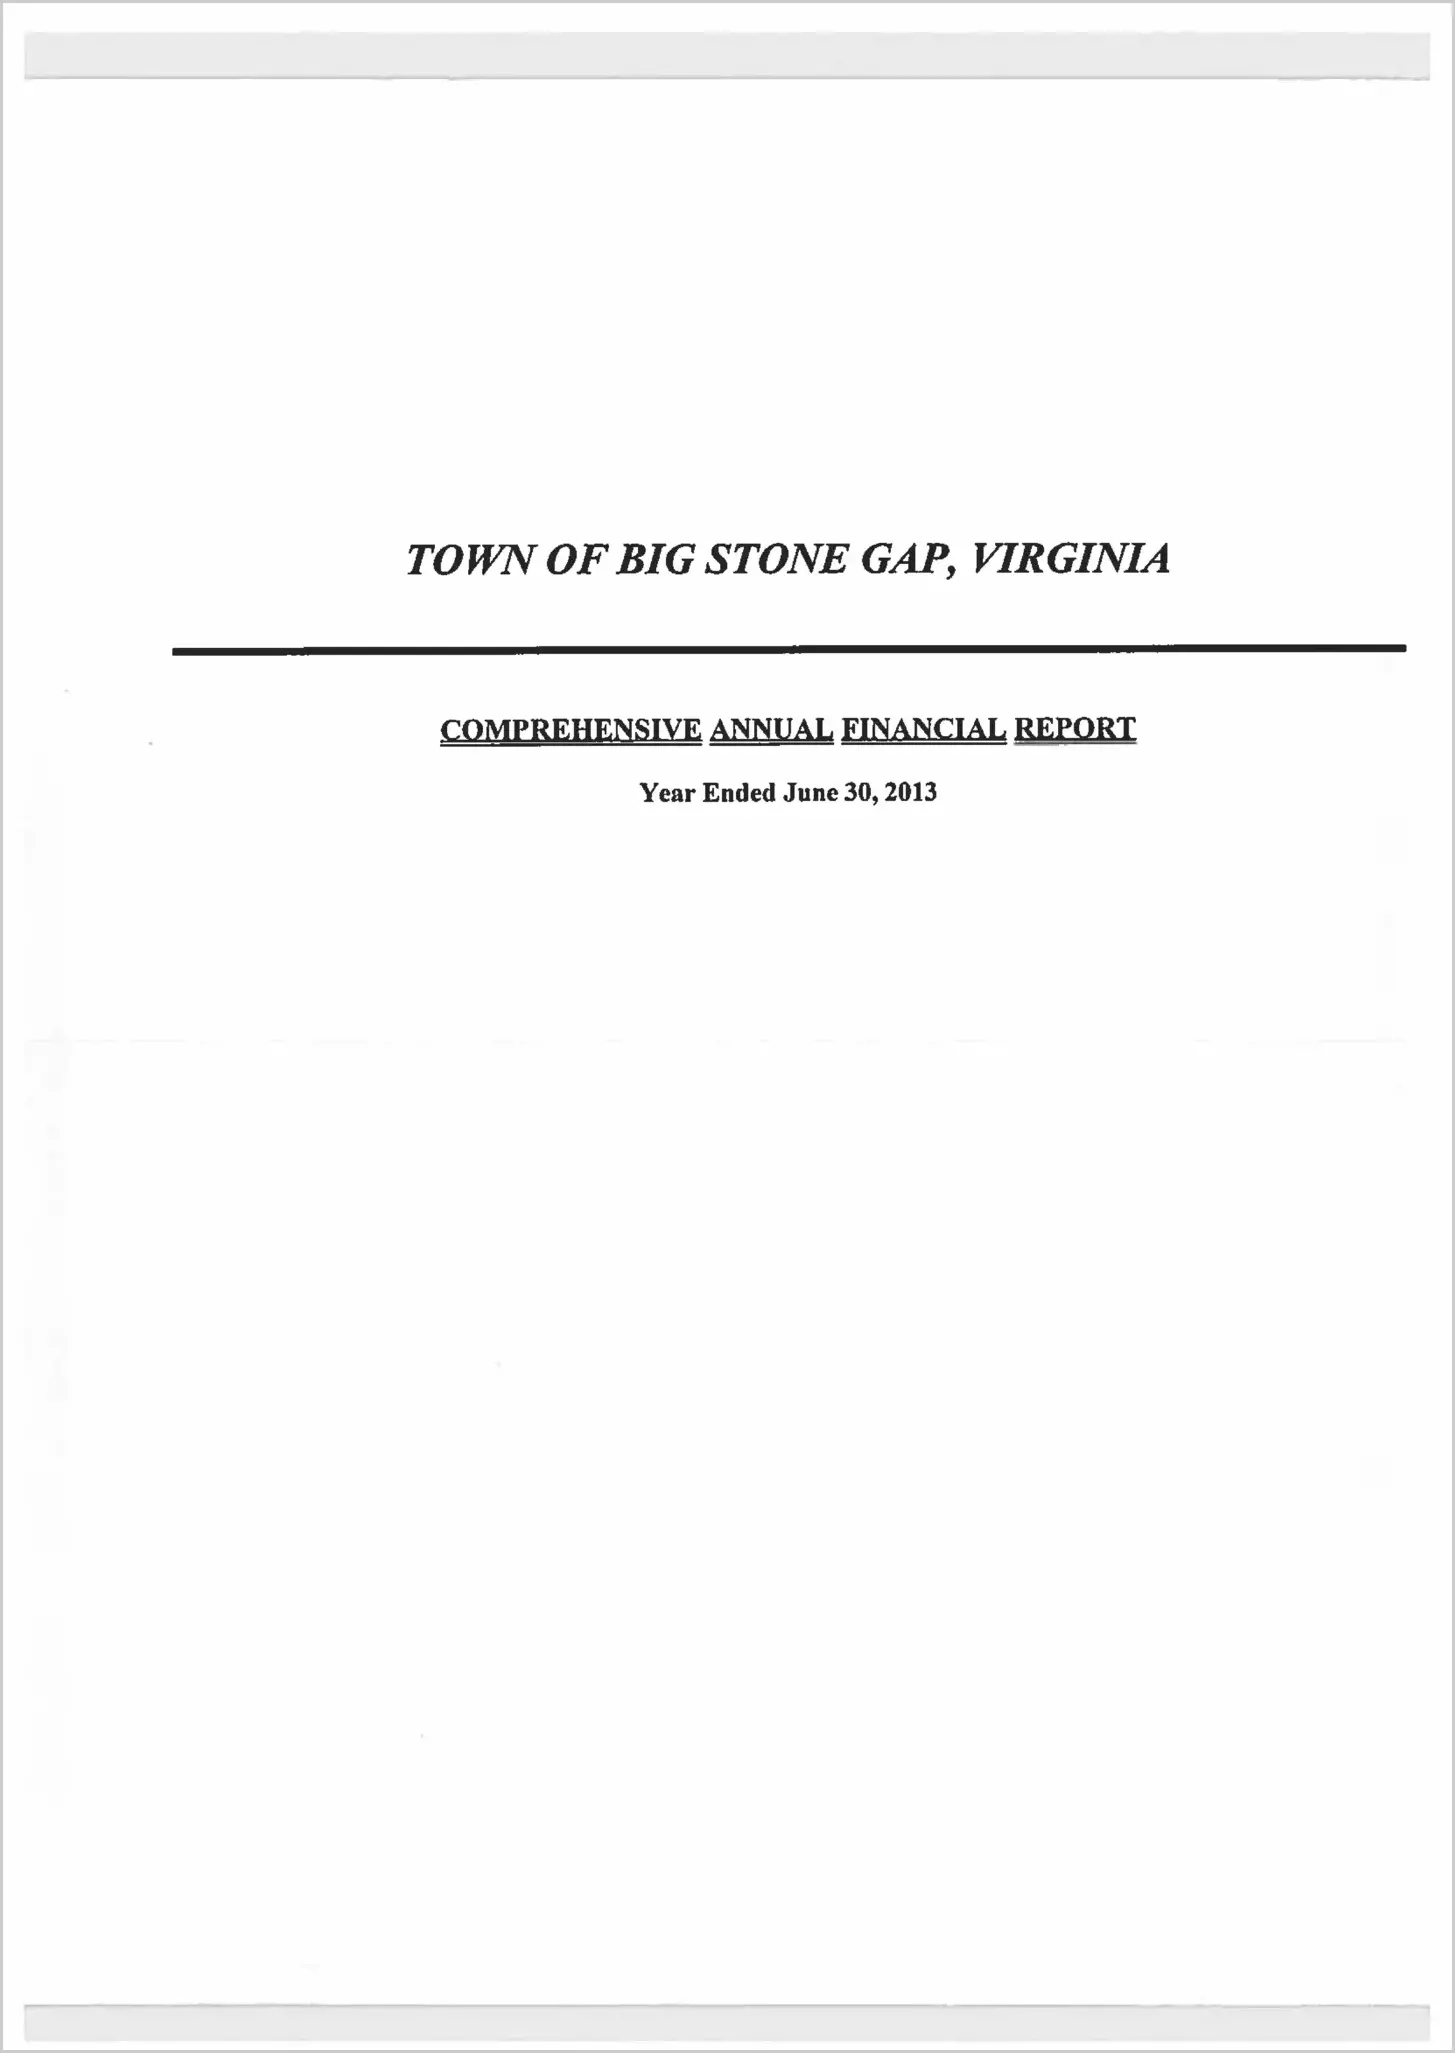 2013 Annual Financial Report for Town of Big Stone Gap